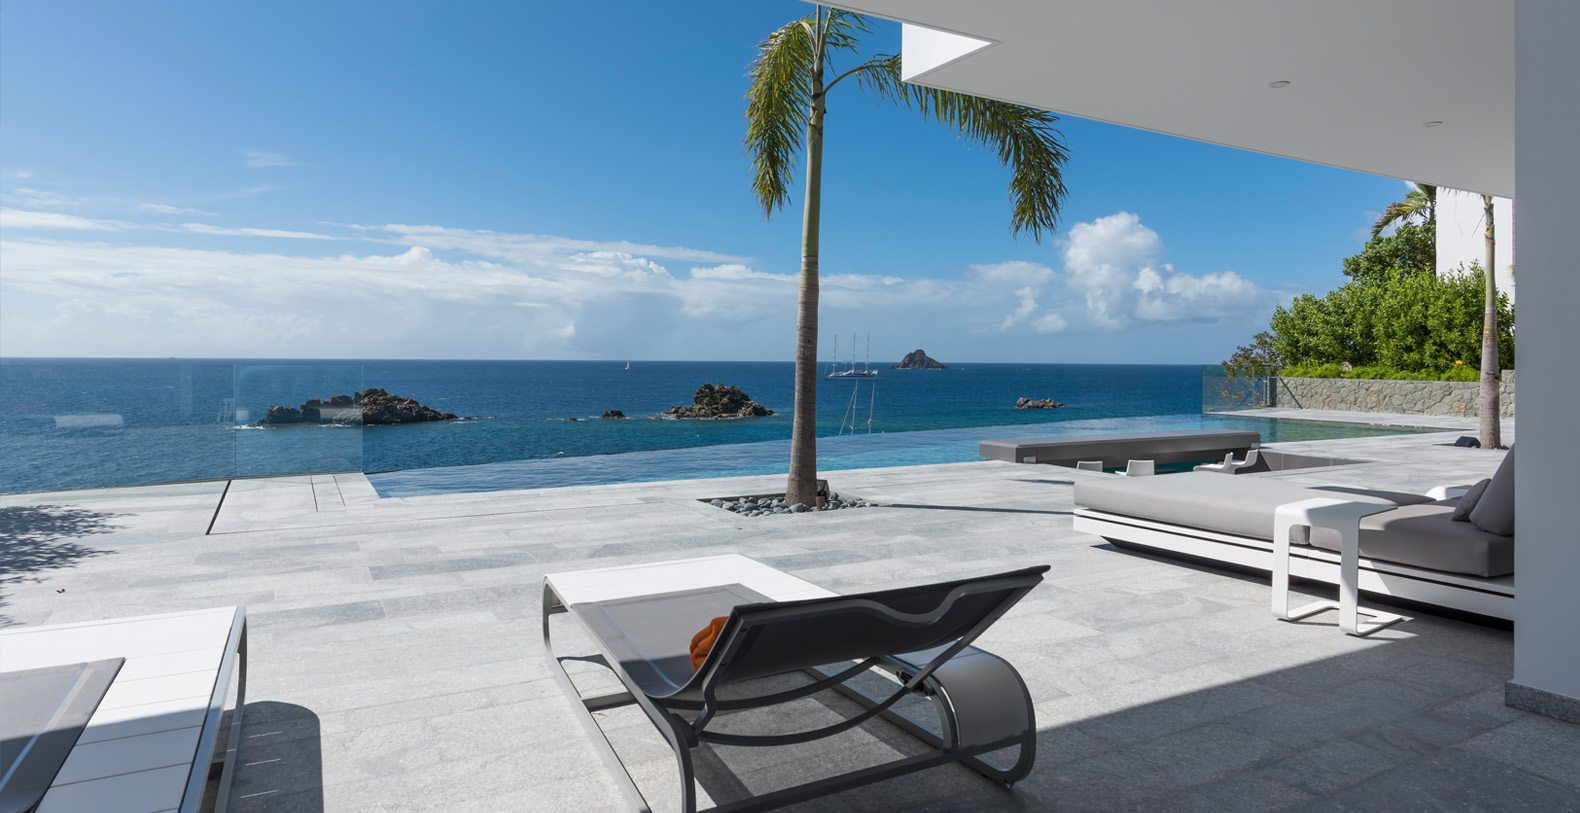 Exploring the Beautiful Beaches of St. Barts  Saint-Barth paradise -  Luxury villas for rent in St Barts